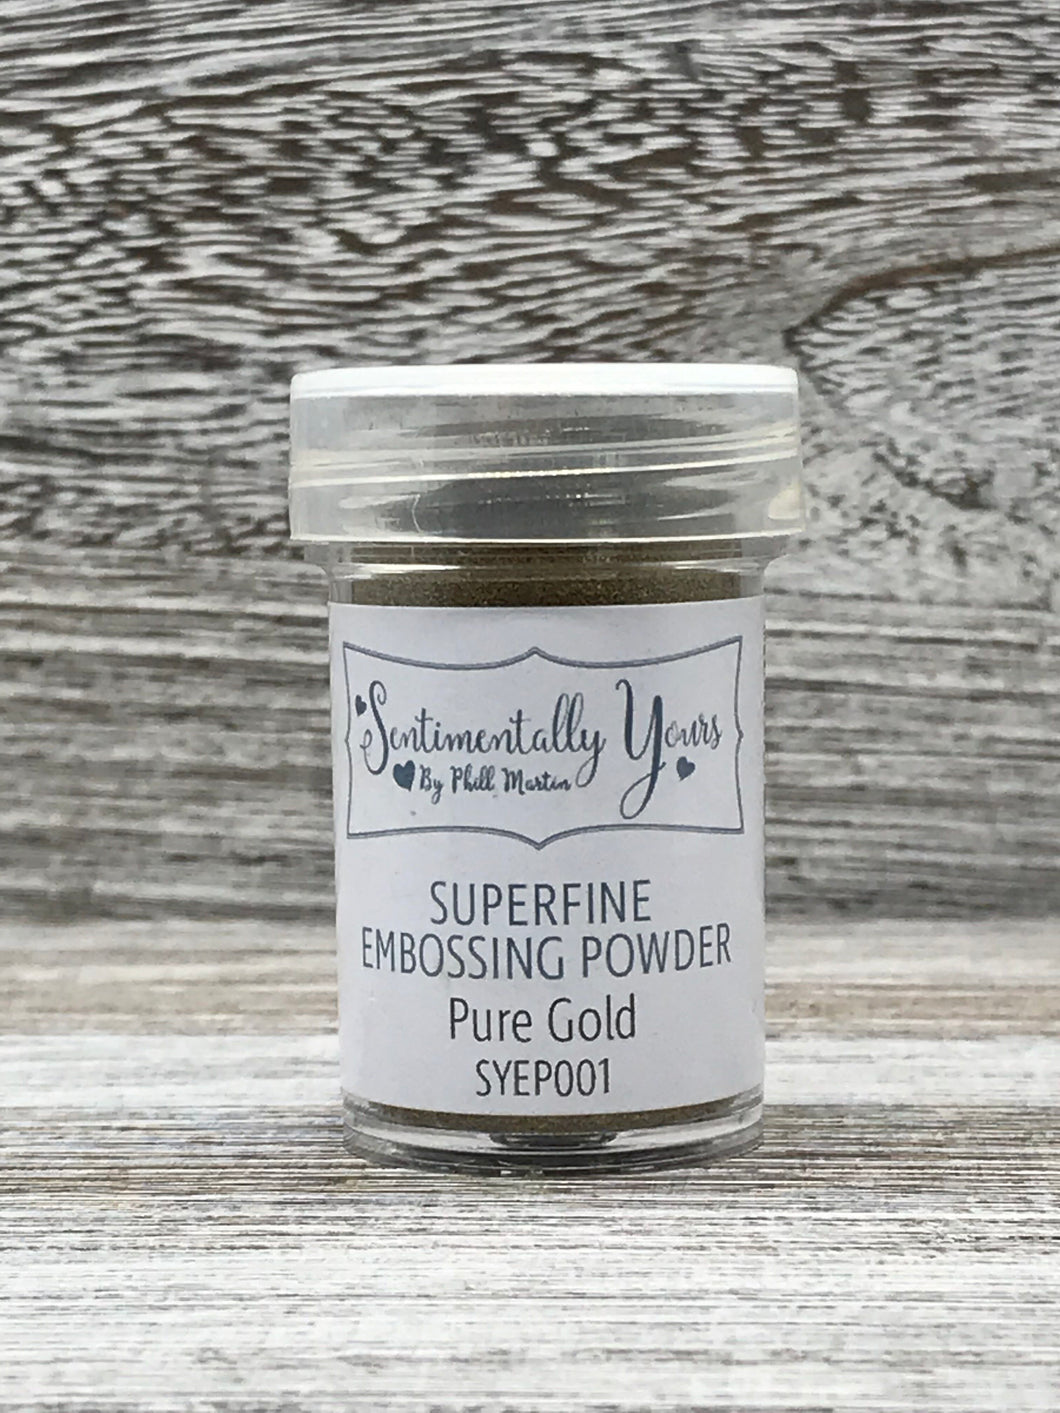 Sentimentally Yours Superfine Embossing Powder - Pure Gold